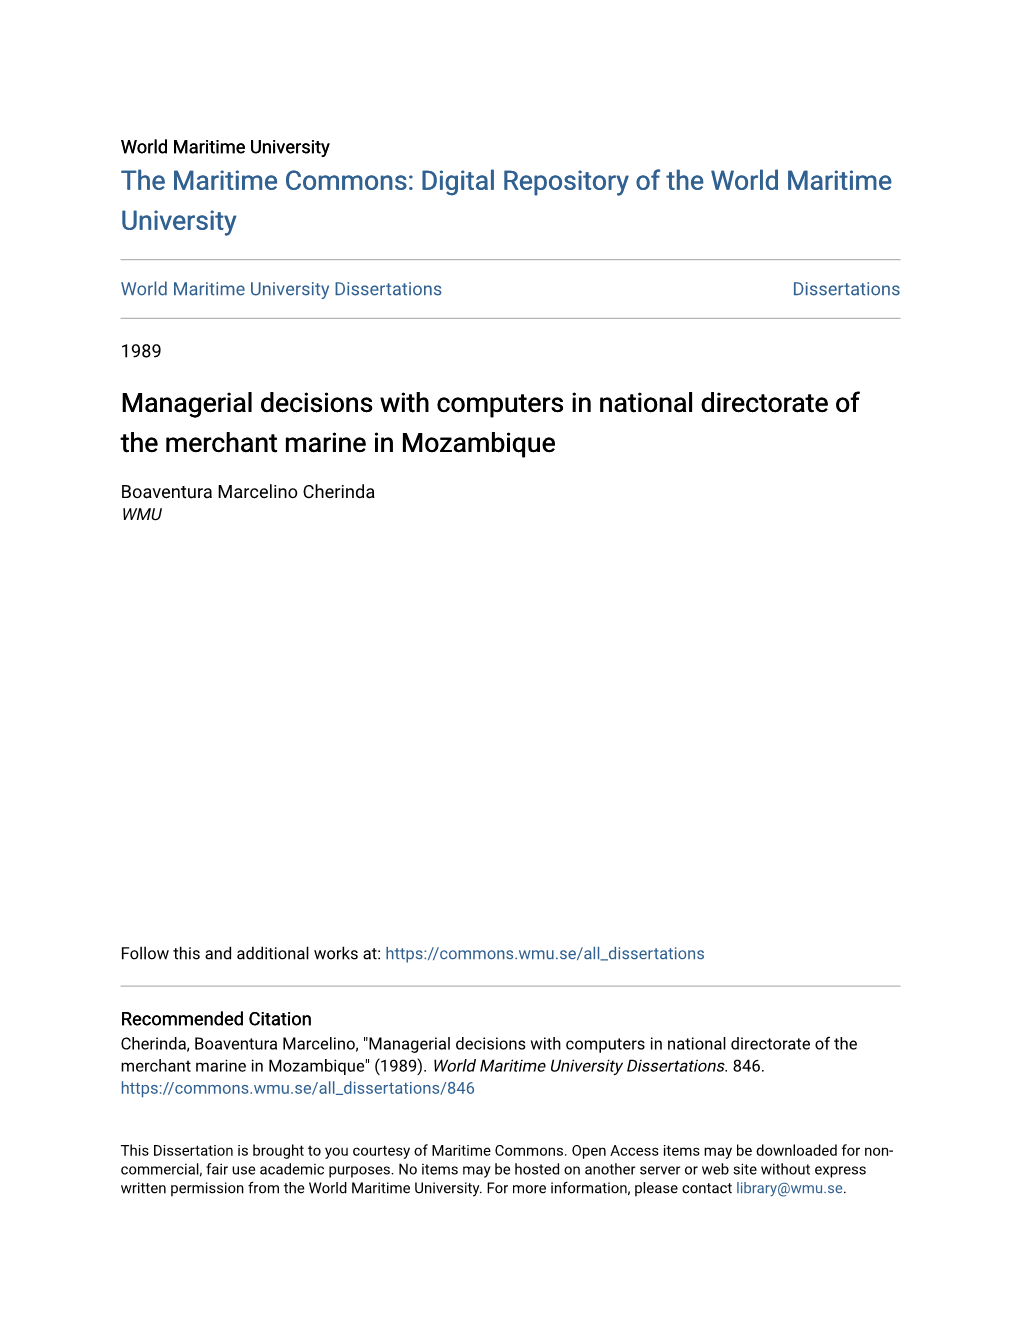 Managerial Decisions with Computers in National Directorate of the Merchant Marine in Mozambique